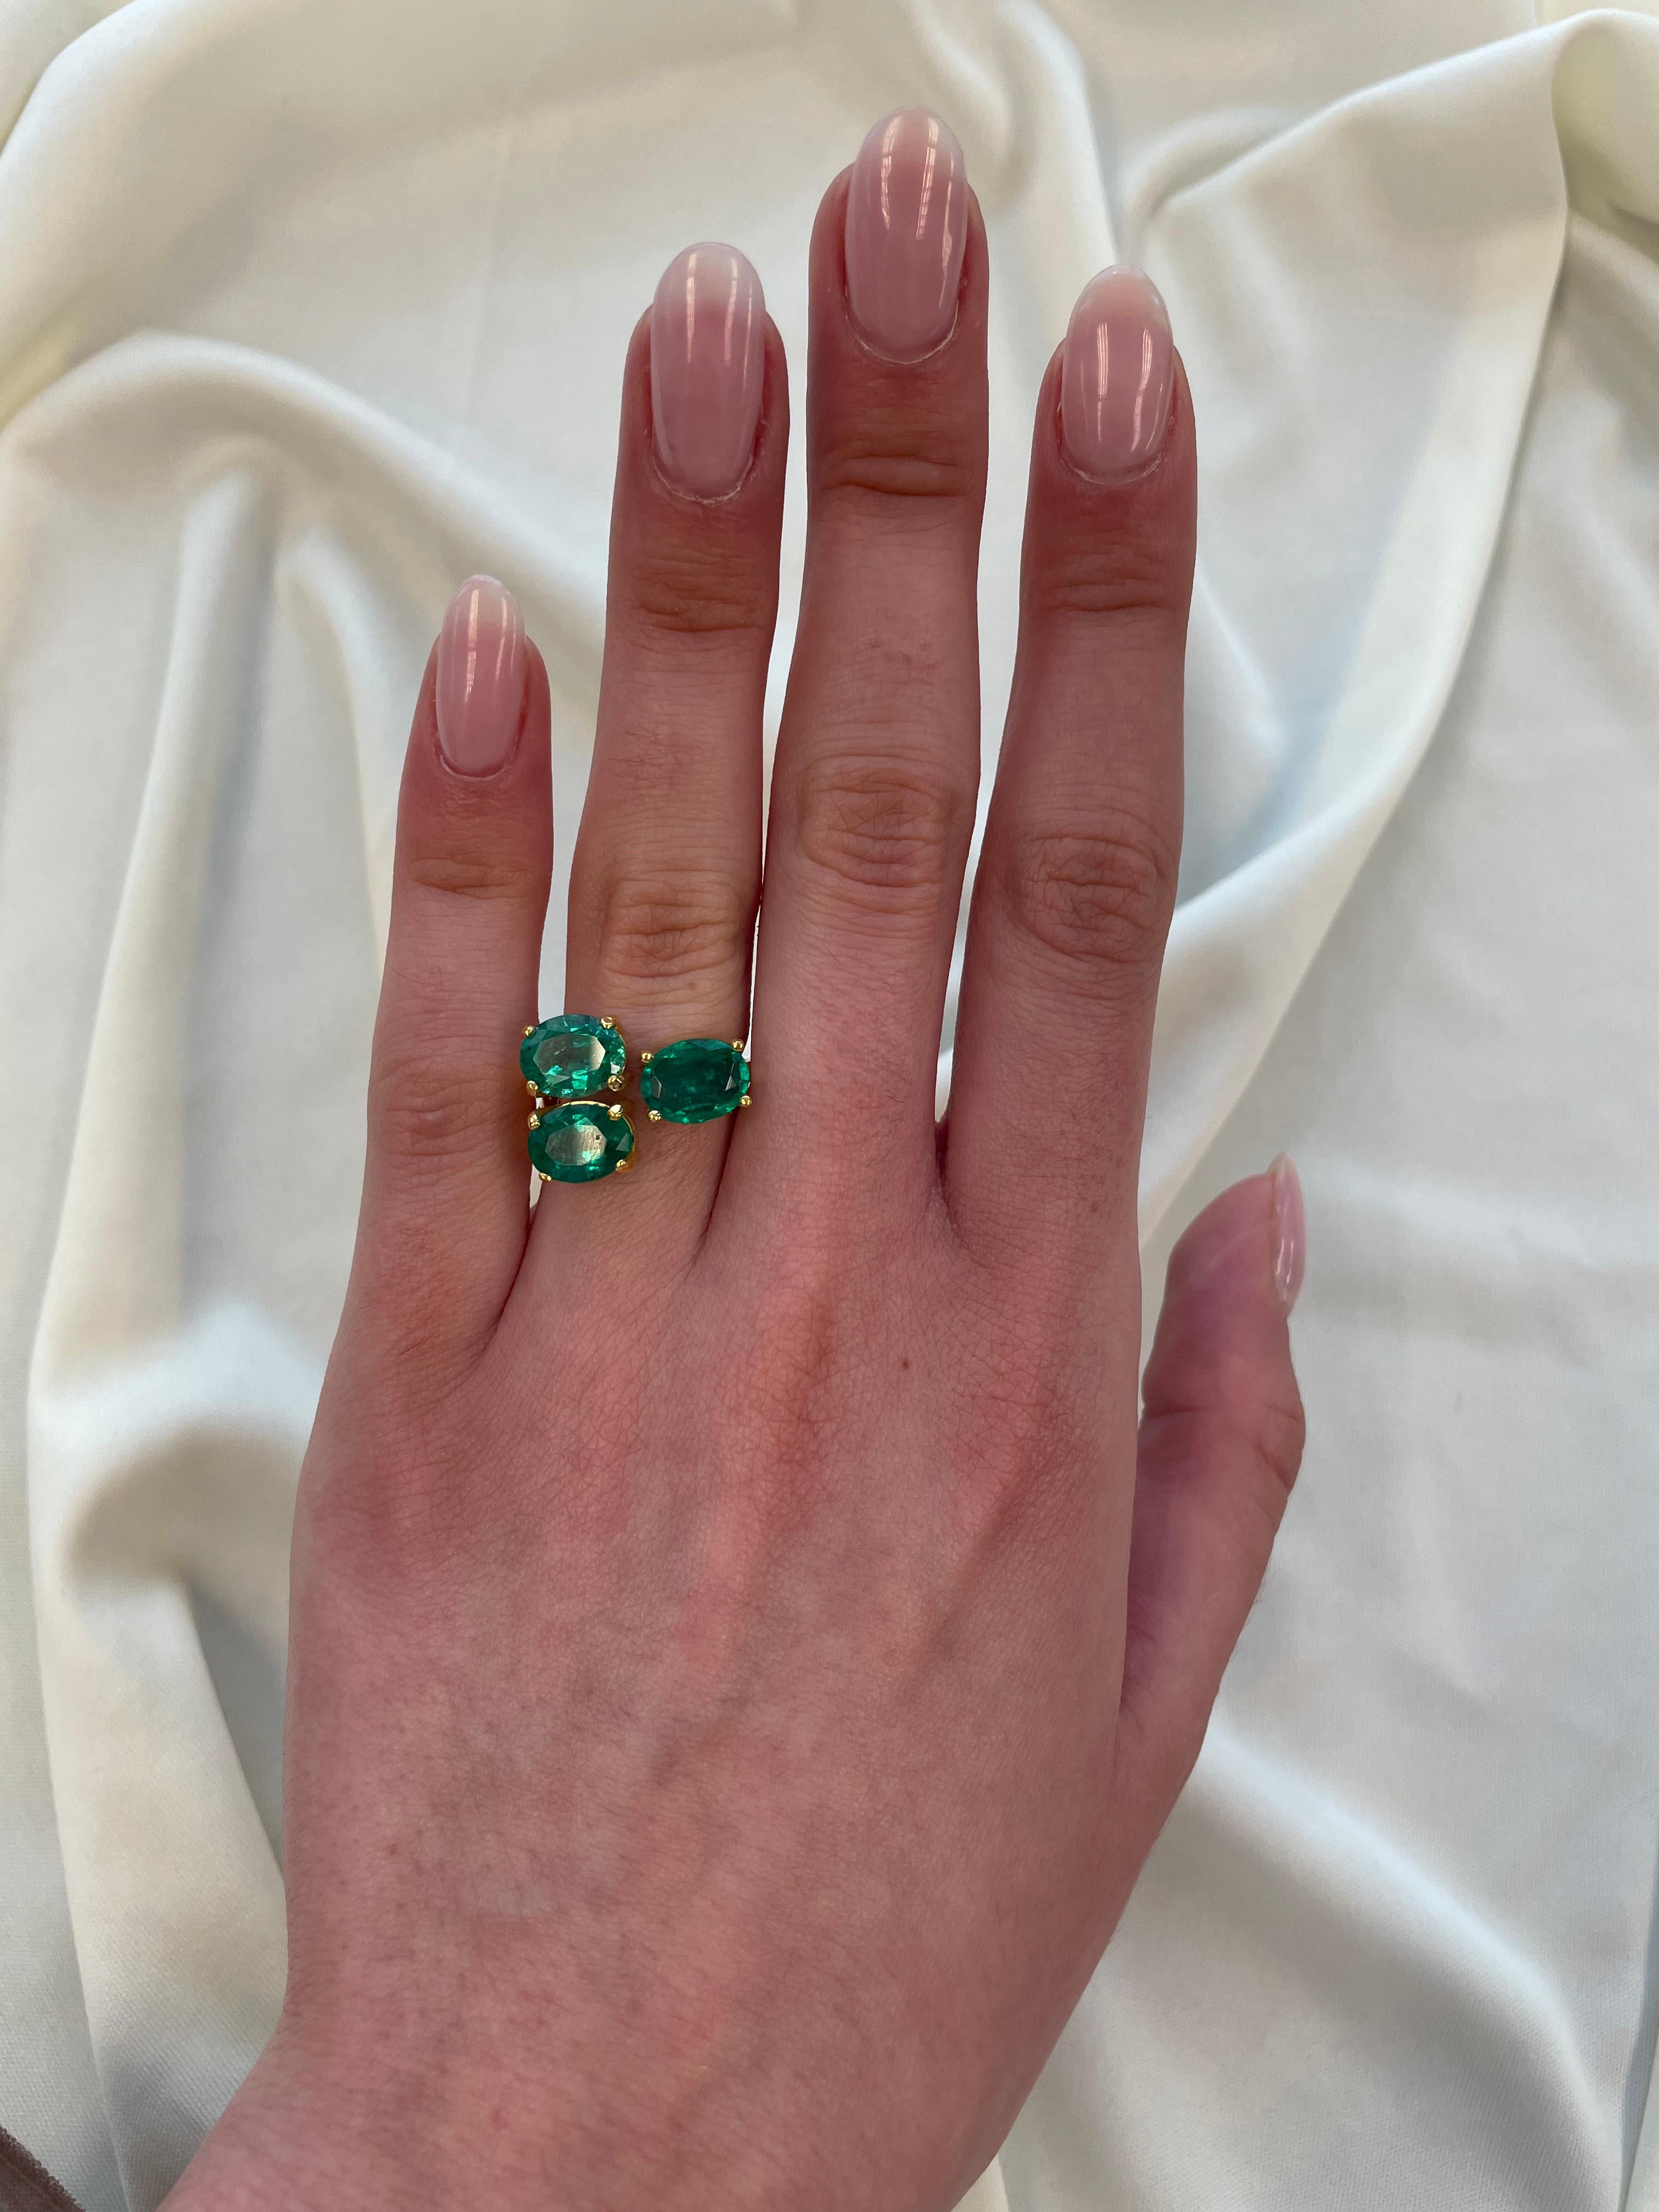 Stunning modern floating emerald and diamond toi et moi ring. By Alexander Beverly Hills.
3 oval emeralds, 4.49 carats apx F2. 18-karat yellow gold, 6.79 grams, current ring size 6.
Accommodated with an up-to-date appraisal by a GIA G.G. once